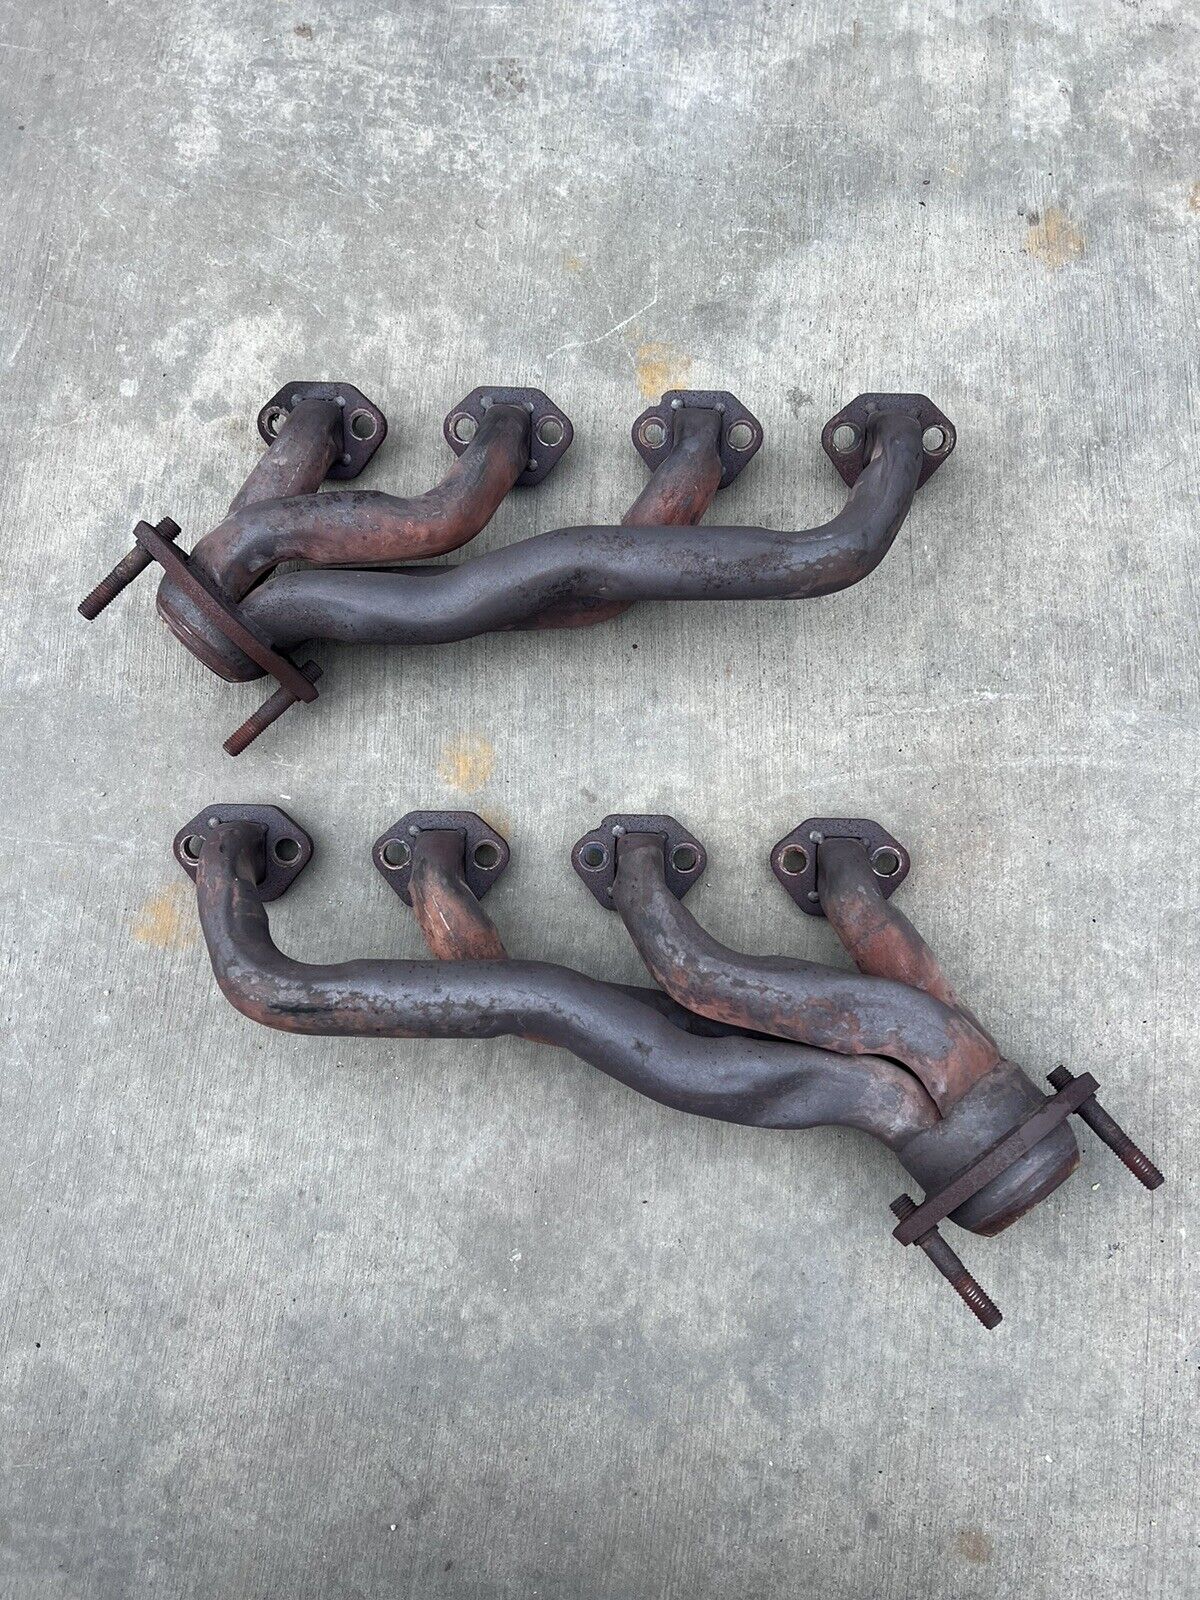 1987-1993 Ford Mustang V8 5.0L 302 Factory Headers OEM Exhaust Manifolds 5.0 L